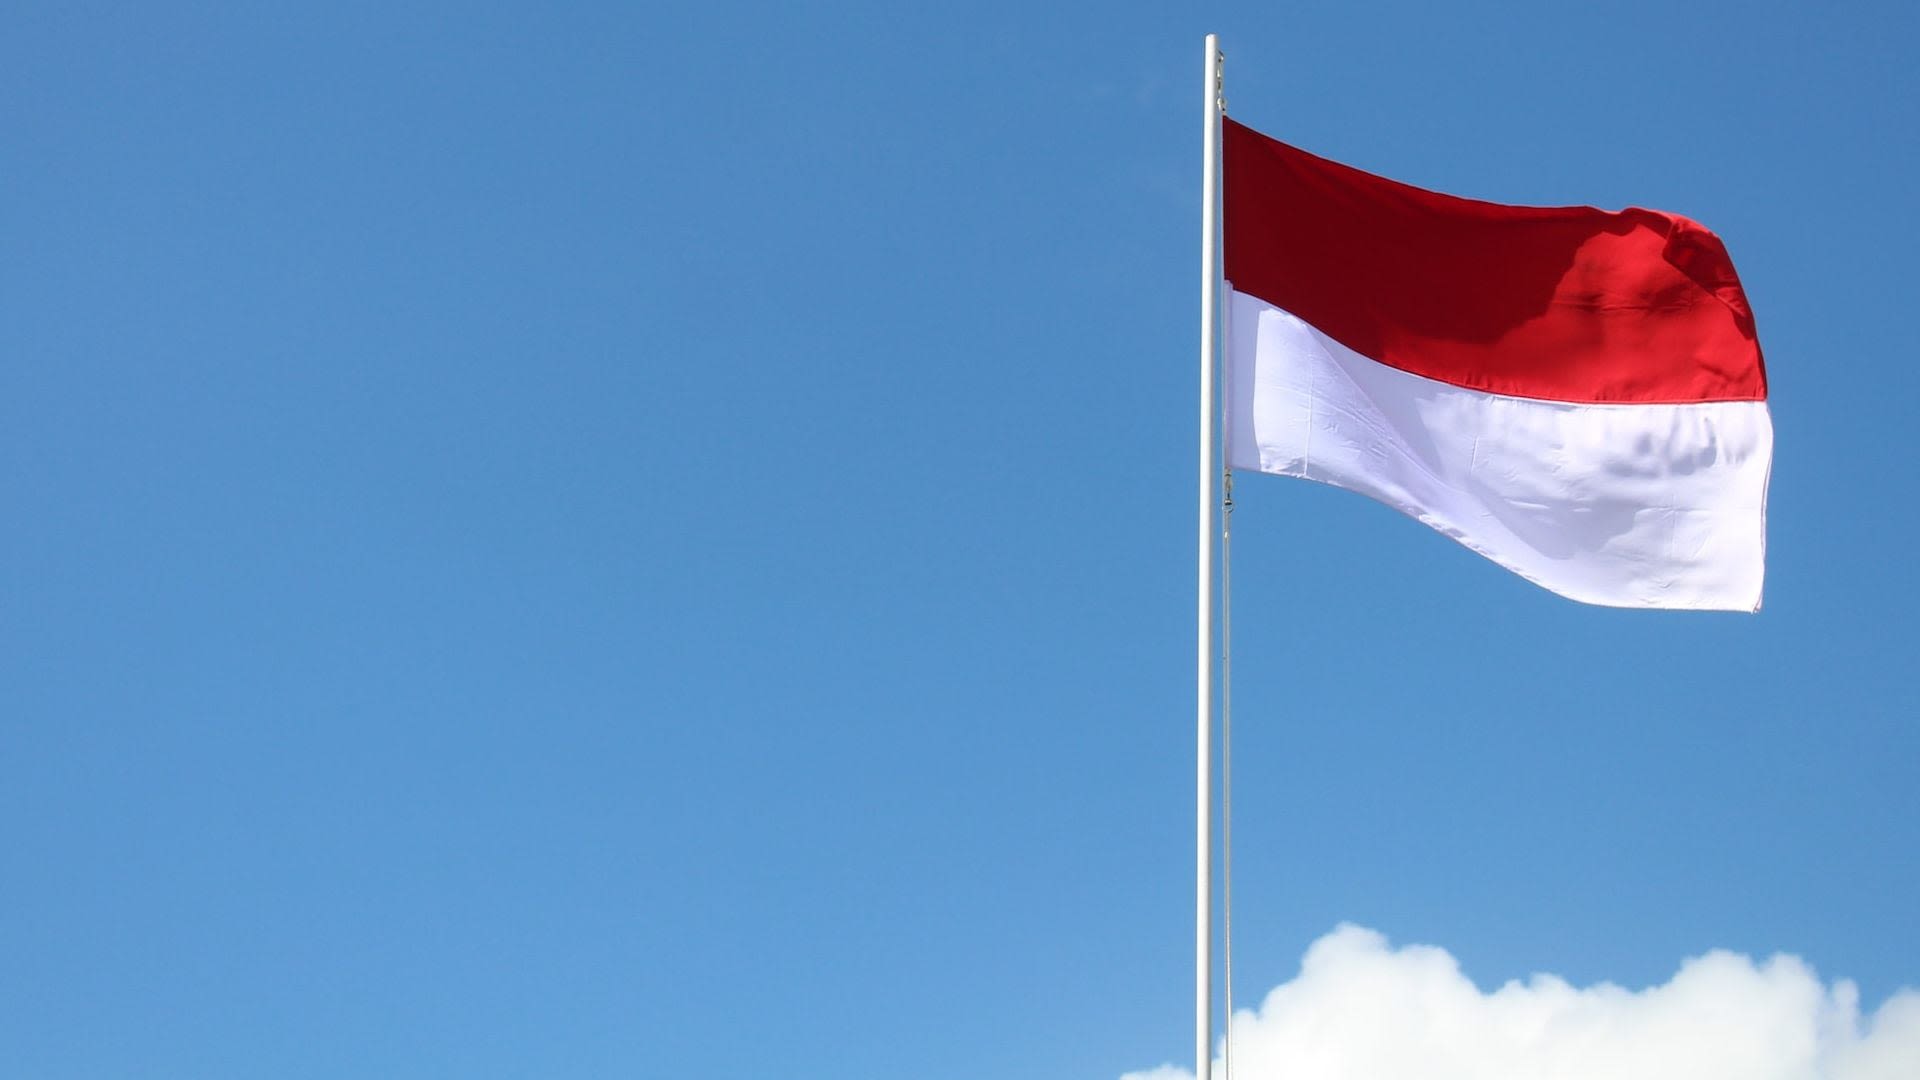 Indonesia Regulator Forms Crypto Committee to Monitor Industry's Operation, Compliance